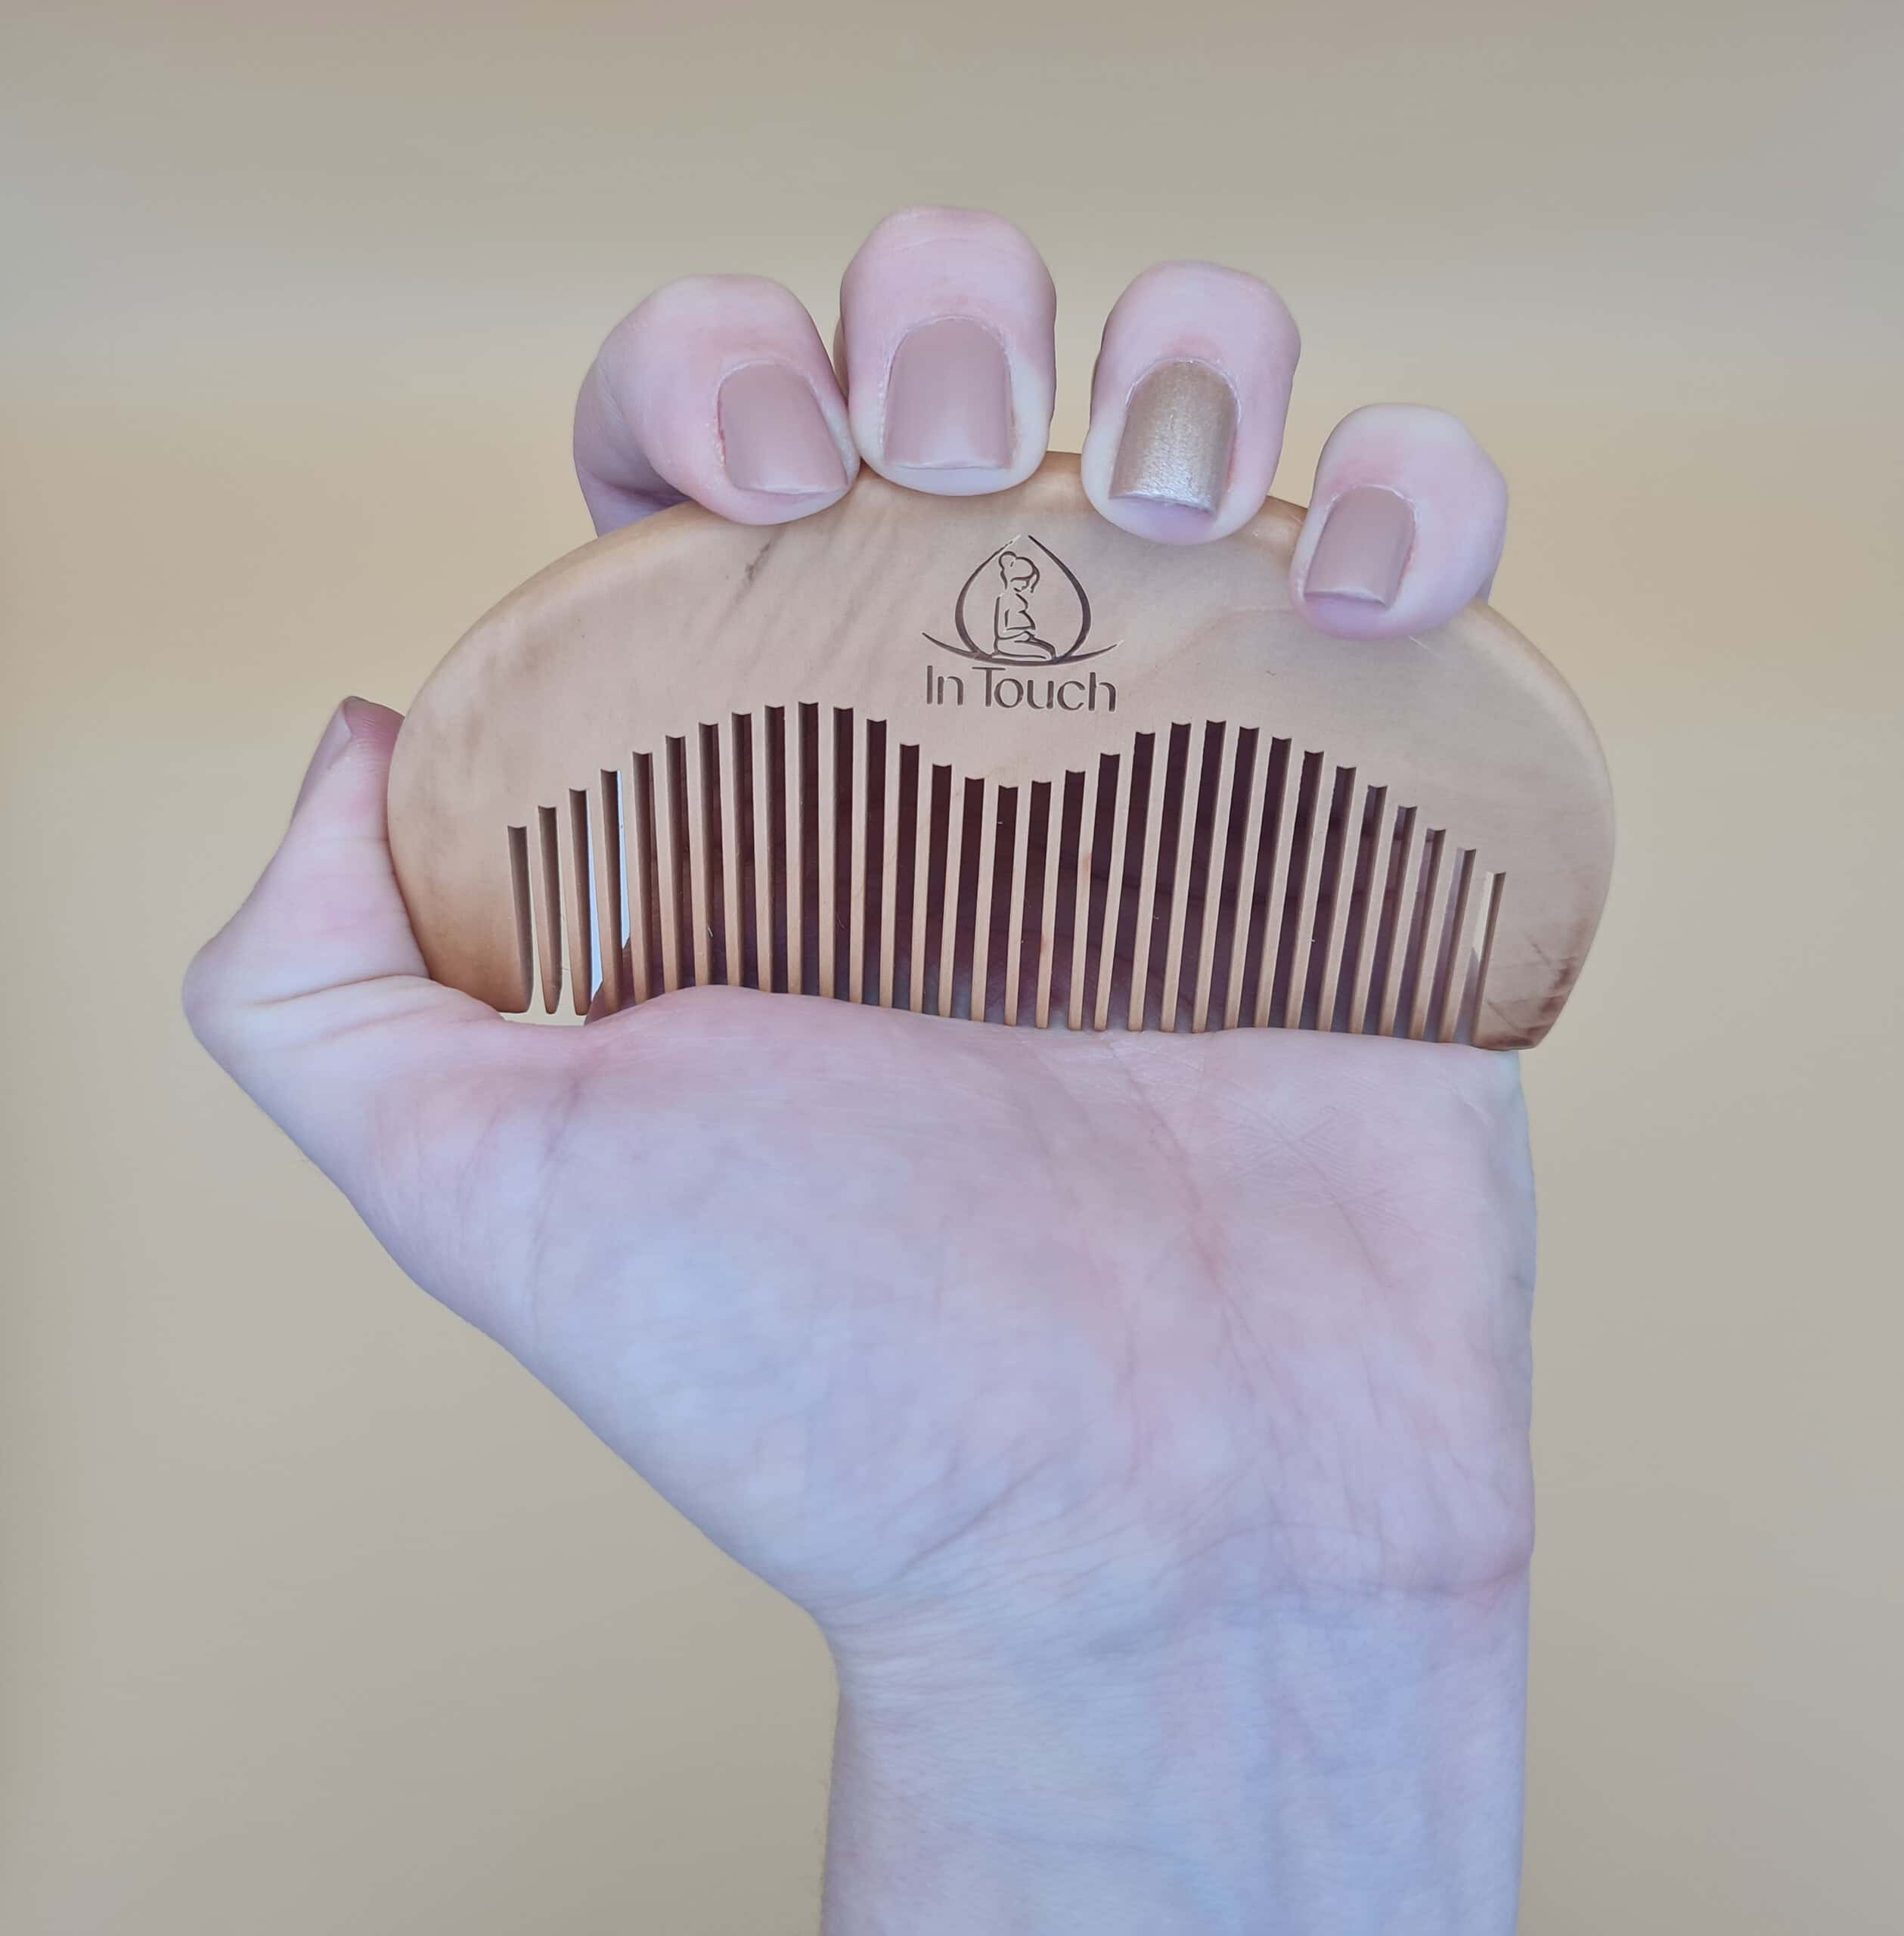 Gripping an acupressure birth comb